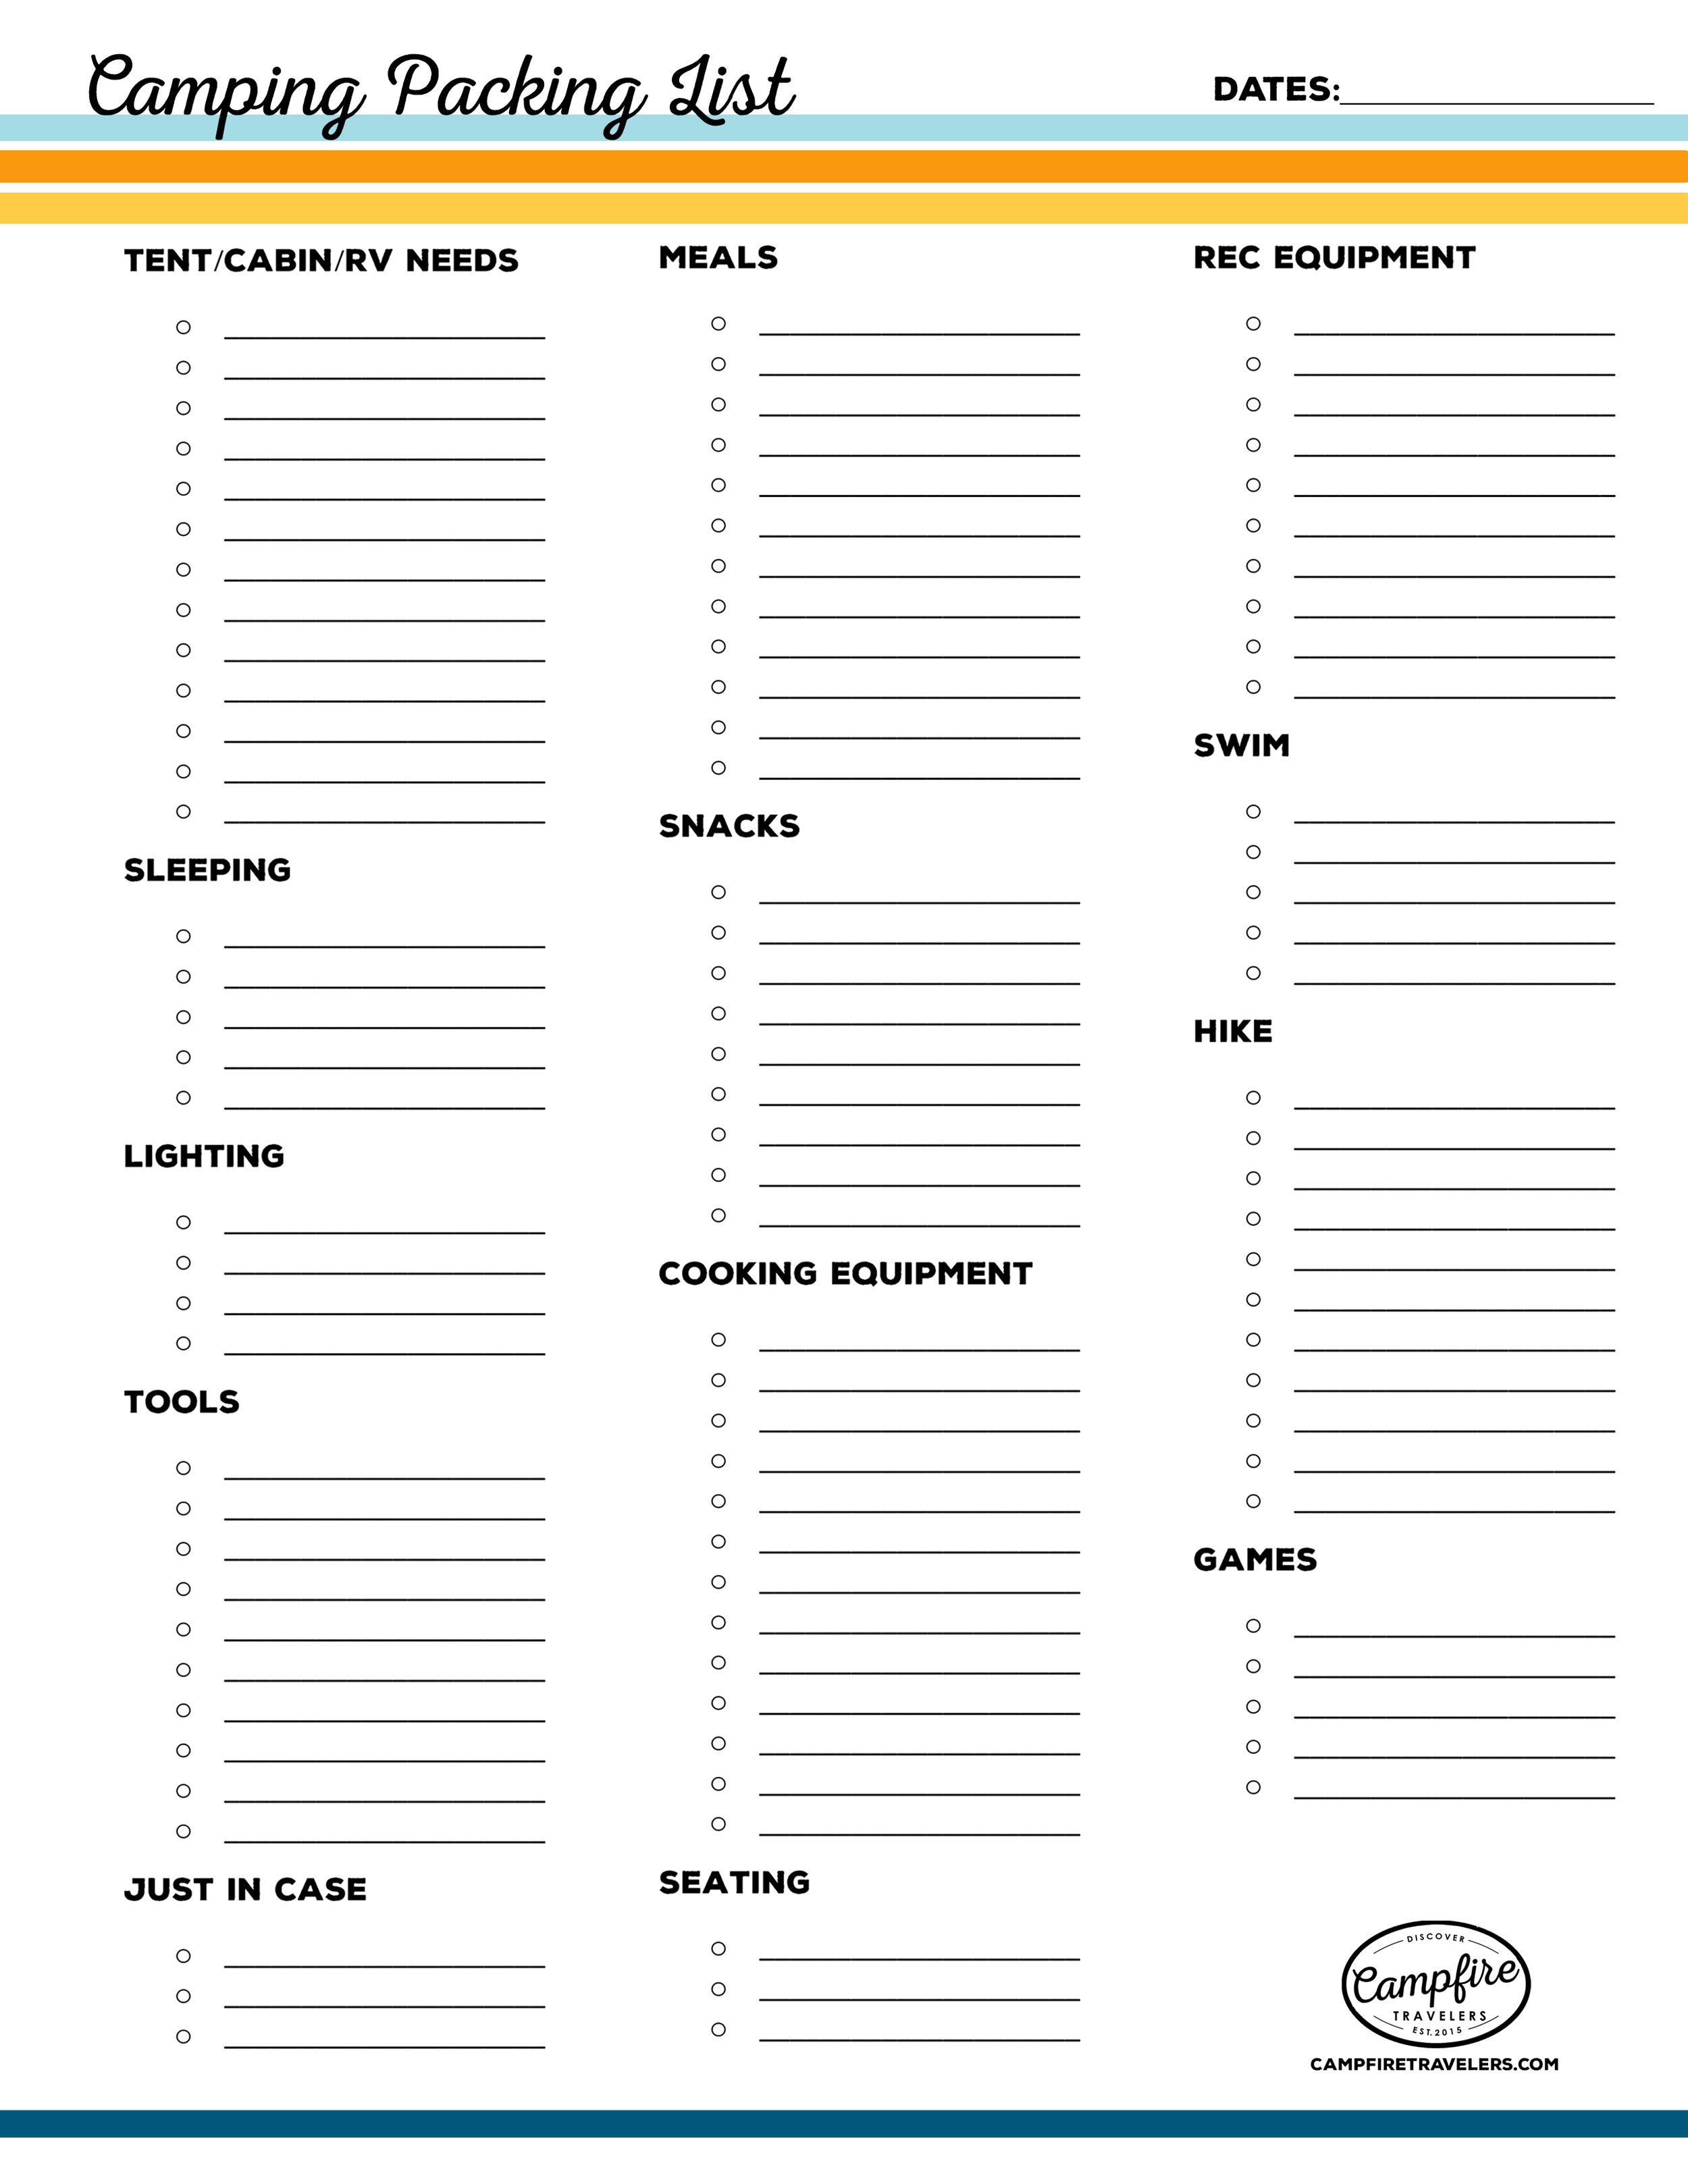 Camping Organized: Essential Printable Camping Checklist for Next Trip | Camping and travel resources for families